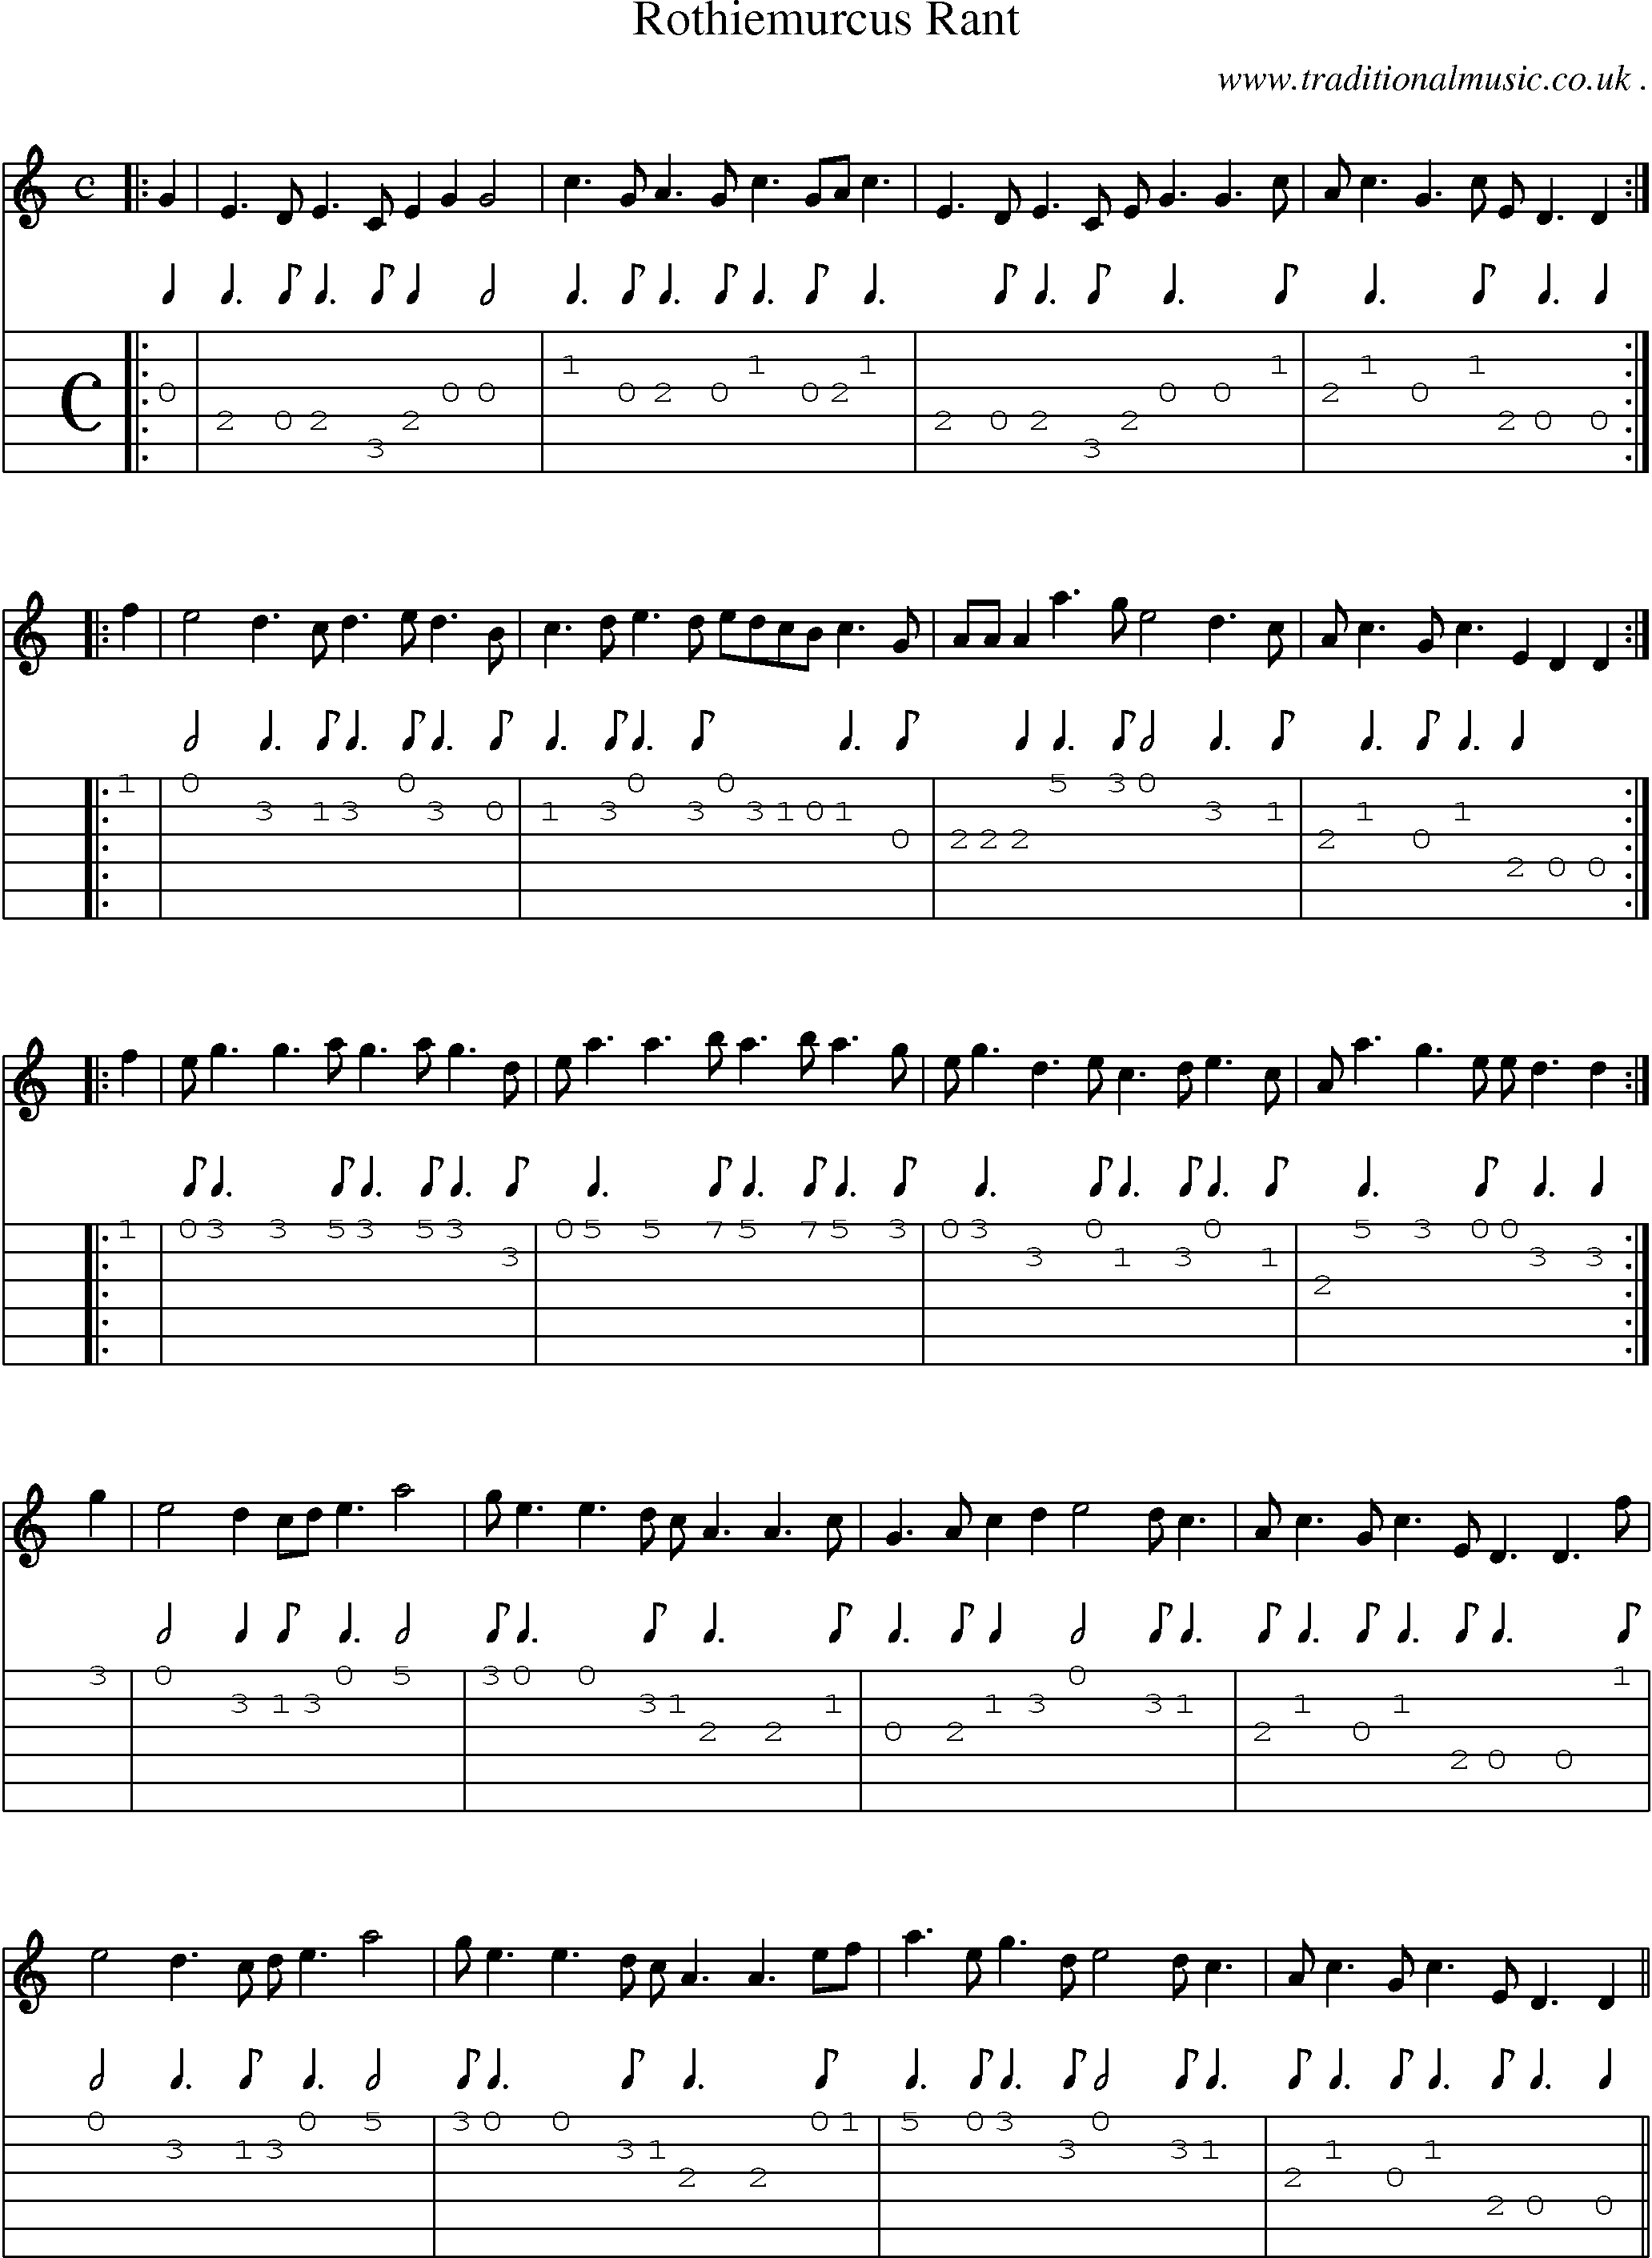 Sheet-Music and Guitar Tabs for Rothiemurcus Rant